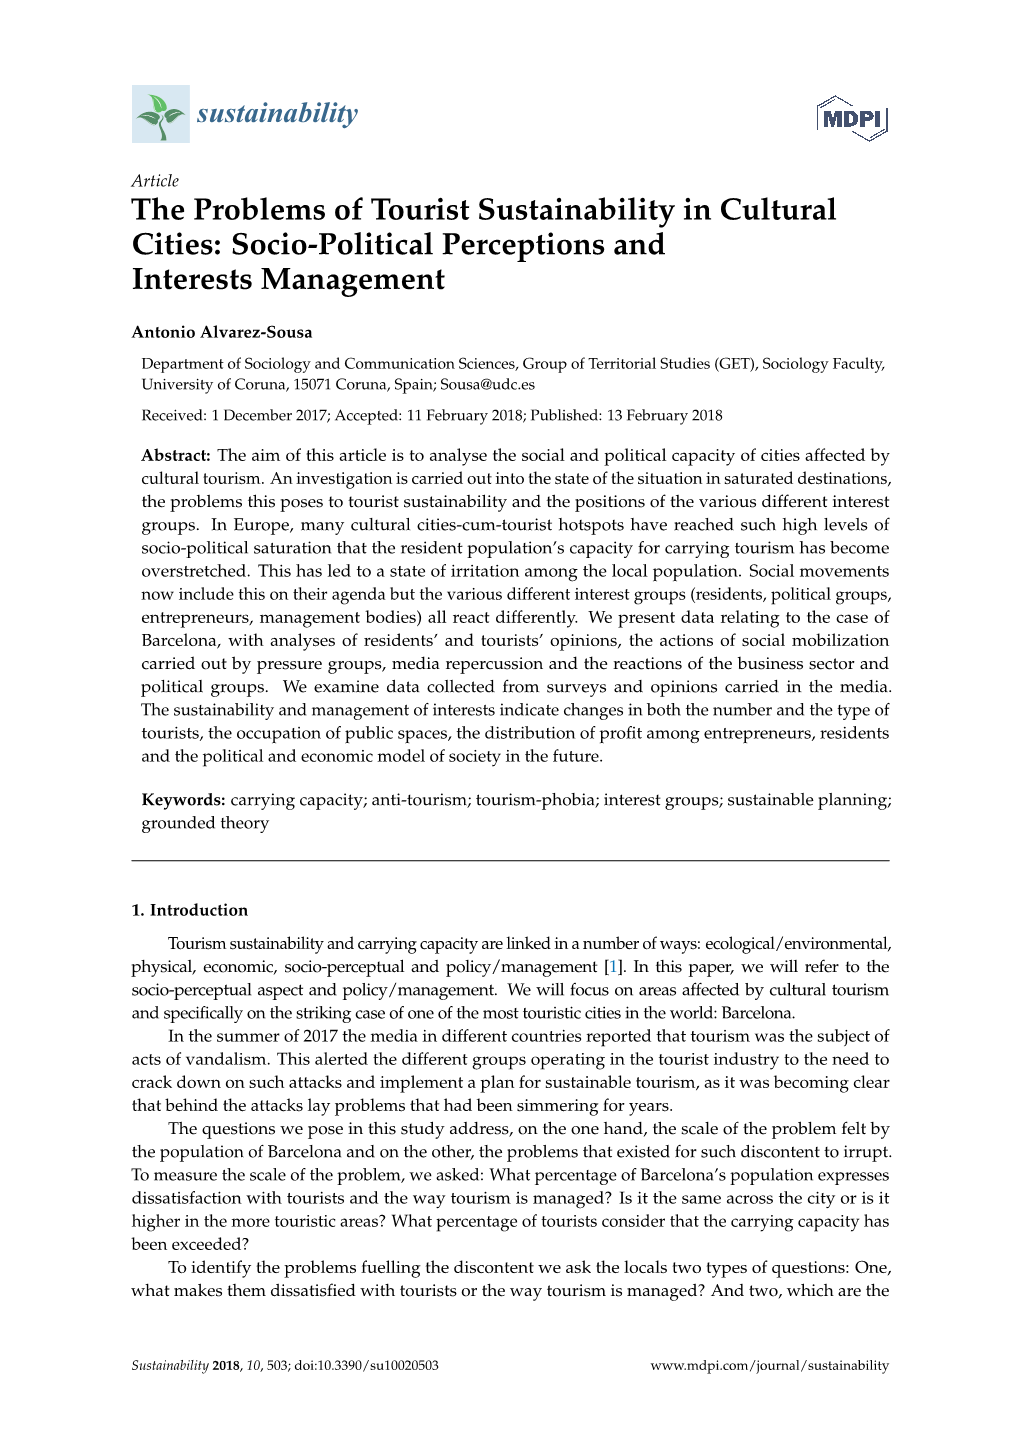 The Problems of Tourist Sustainability in Cultural Cities: Socio-Political Perceptions and Interests Management